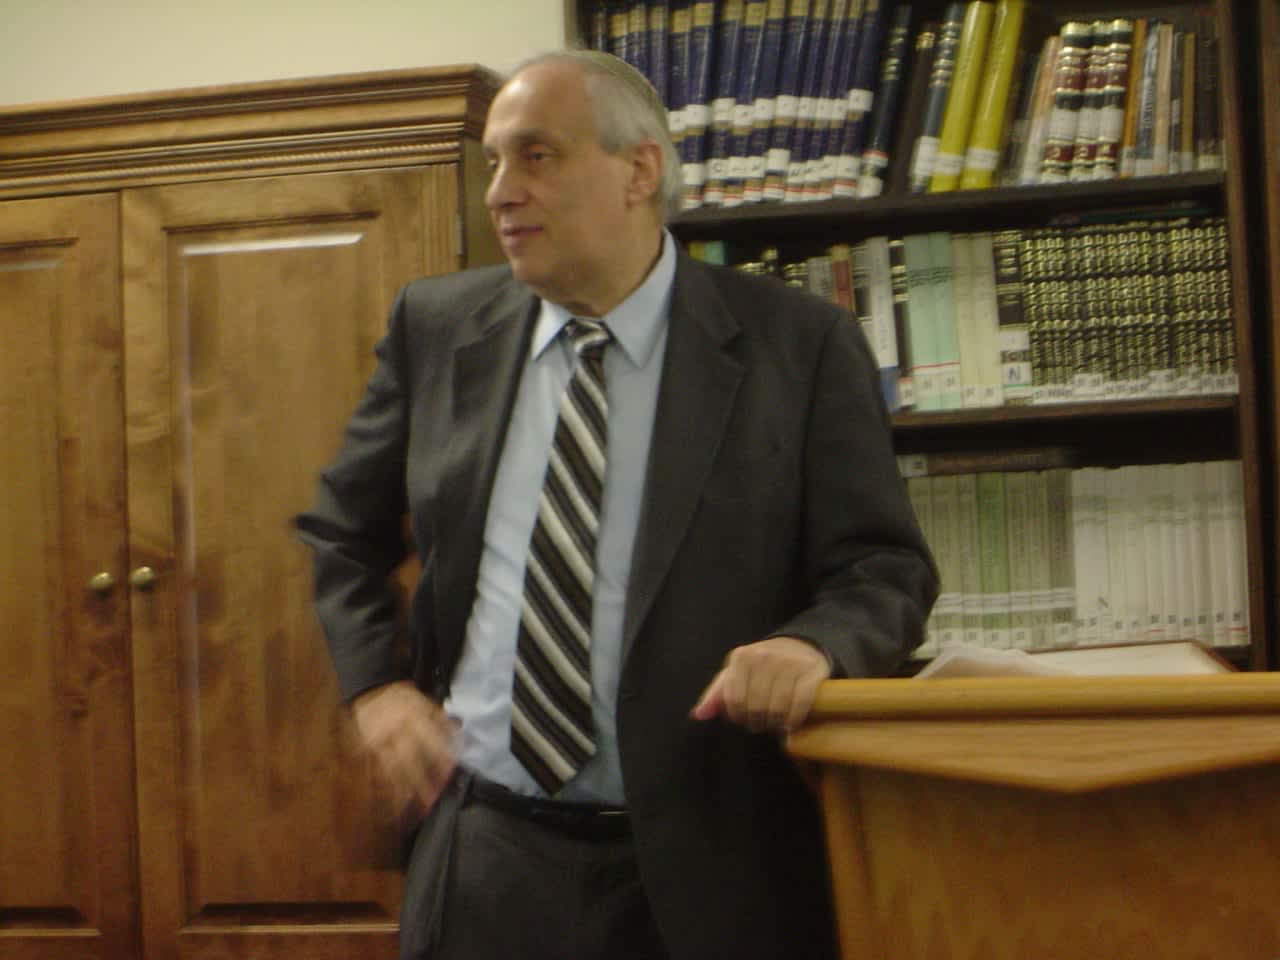 Rabbi Avraham Weiss of the Hebrew Institute of Riverdale.